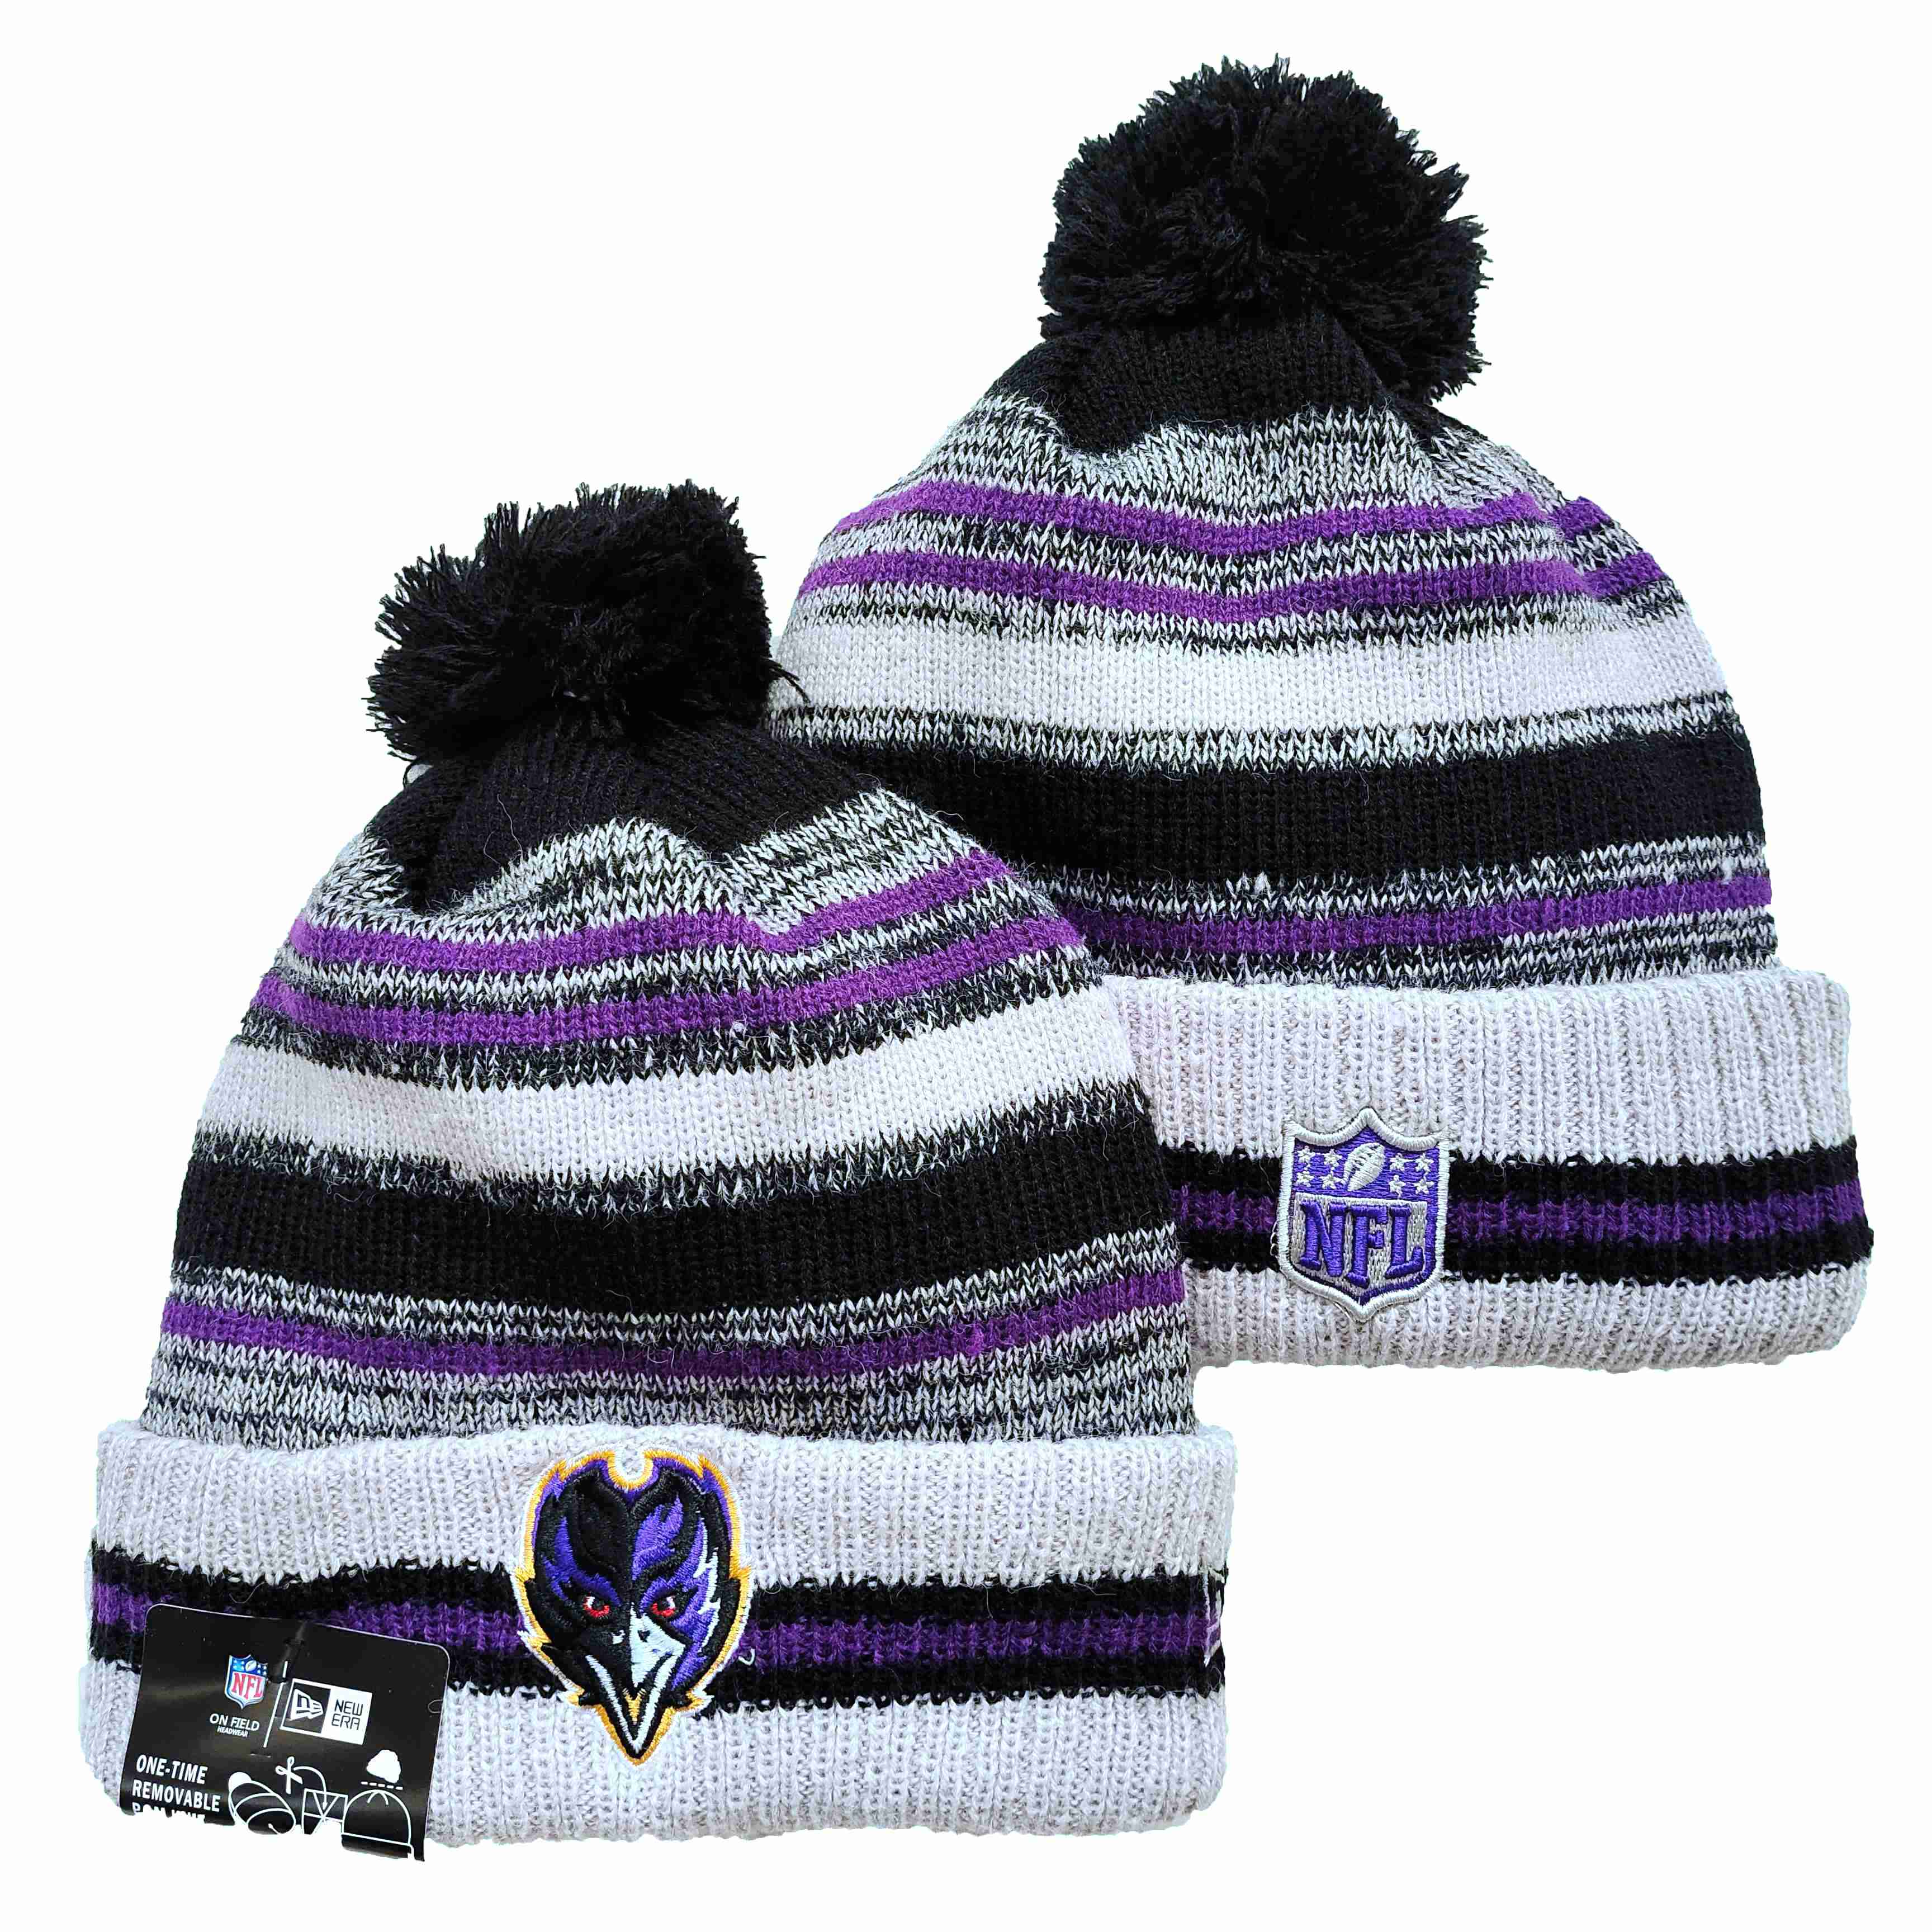 NFL Baltimore Ravens Beanies Knit Hats-YD1195